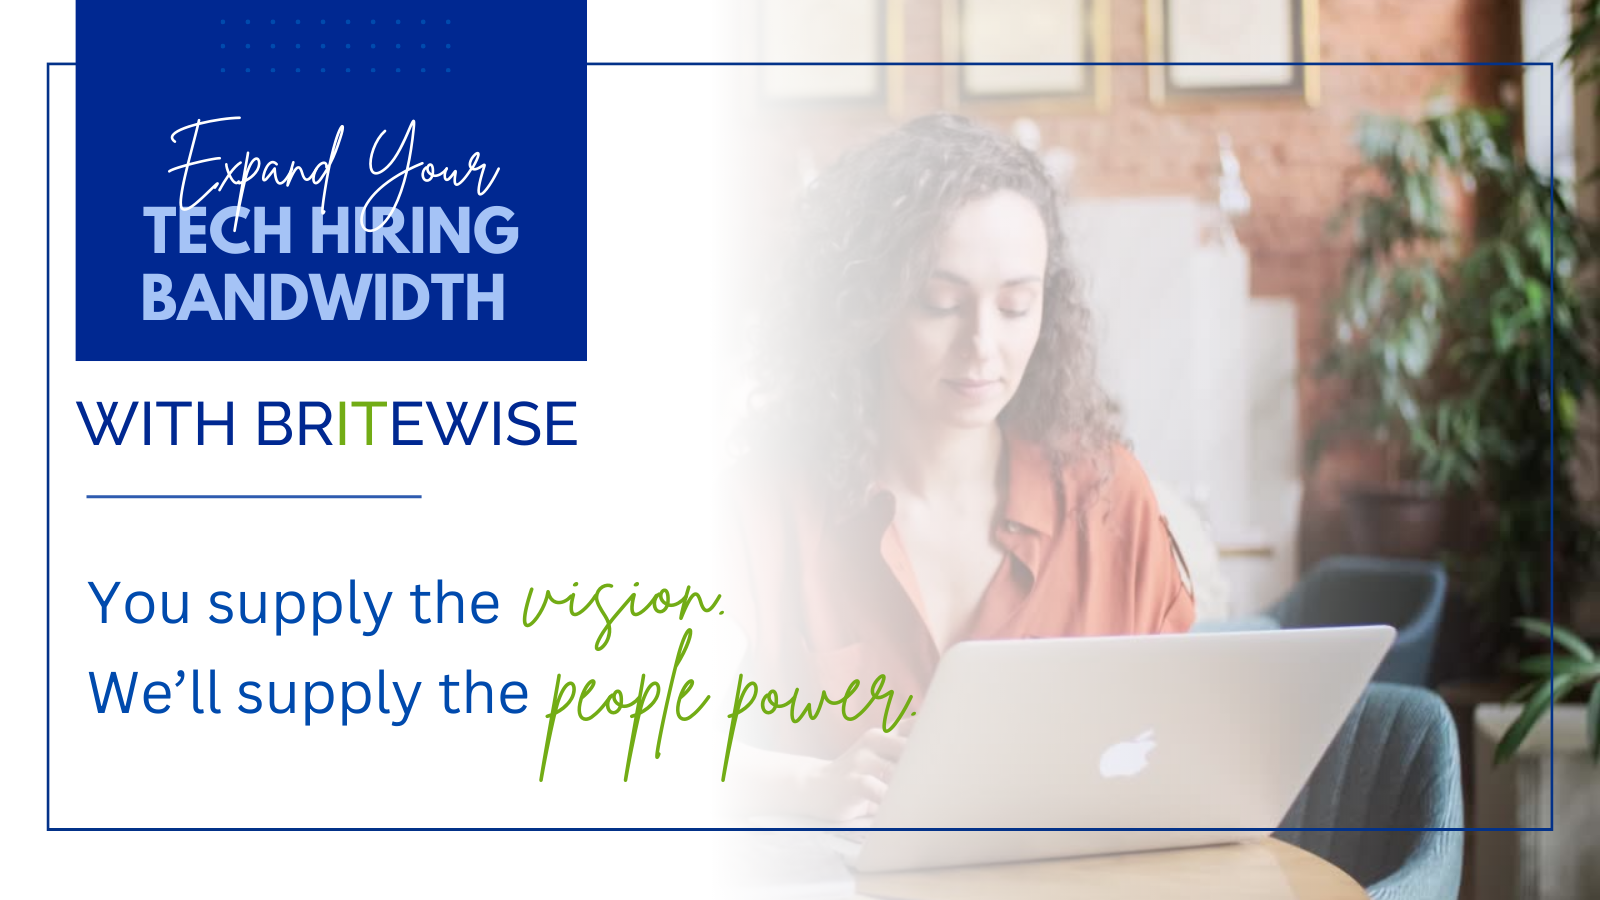 Expand your technology hiring bandwidth with Britewise. You supply the vision. We supply the people power.